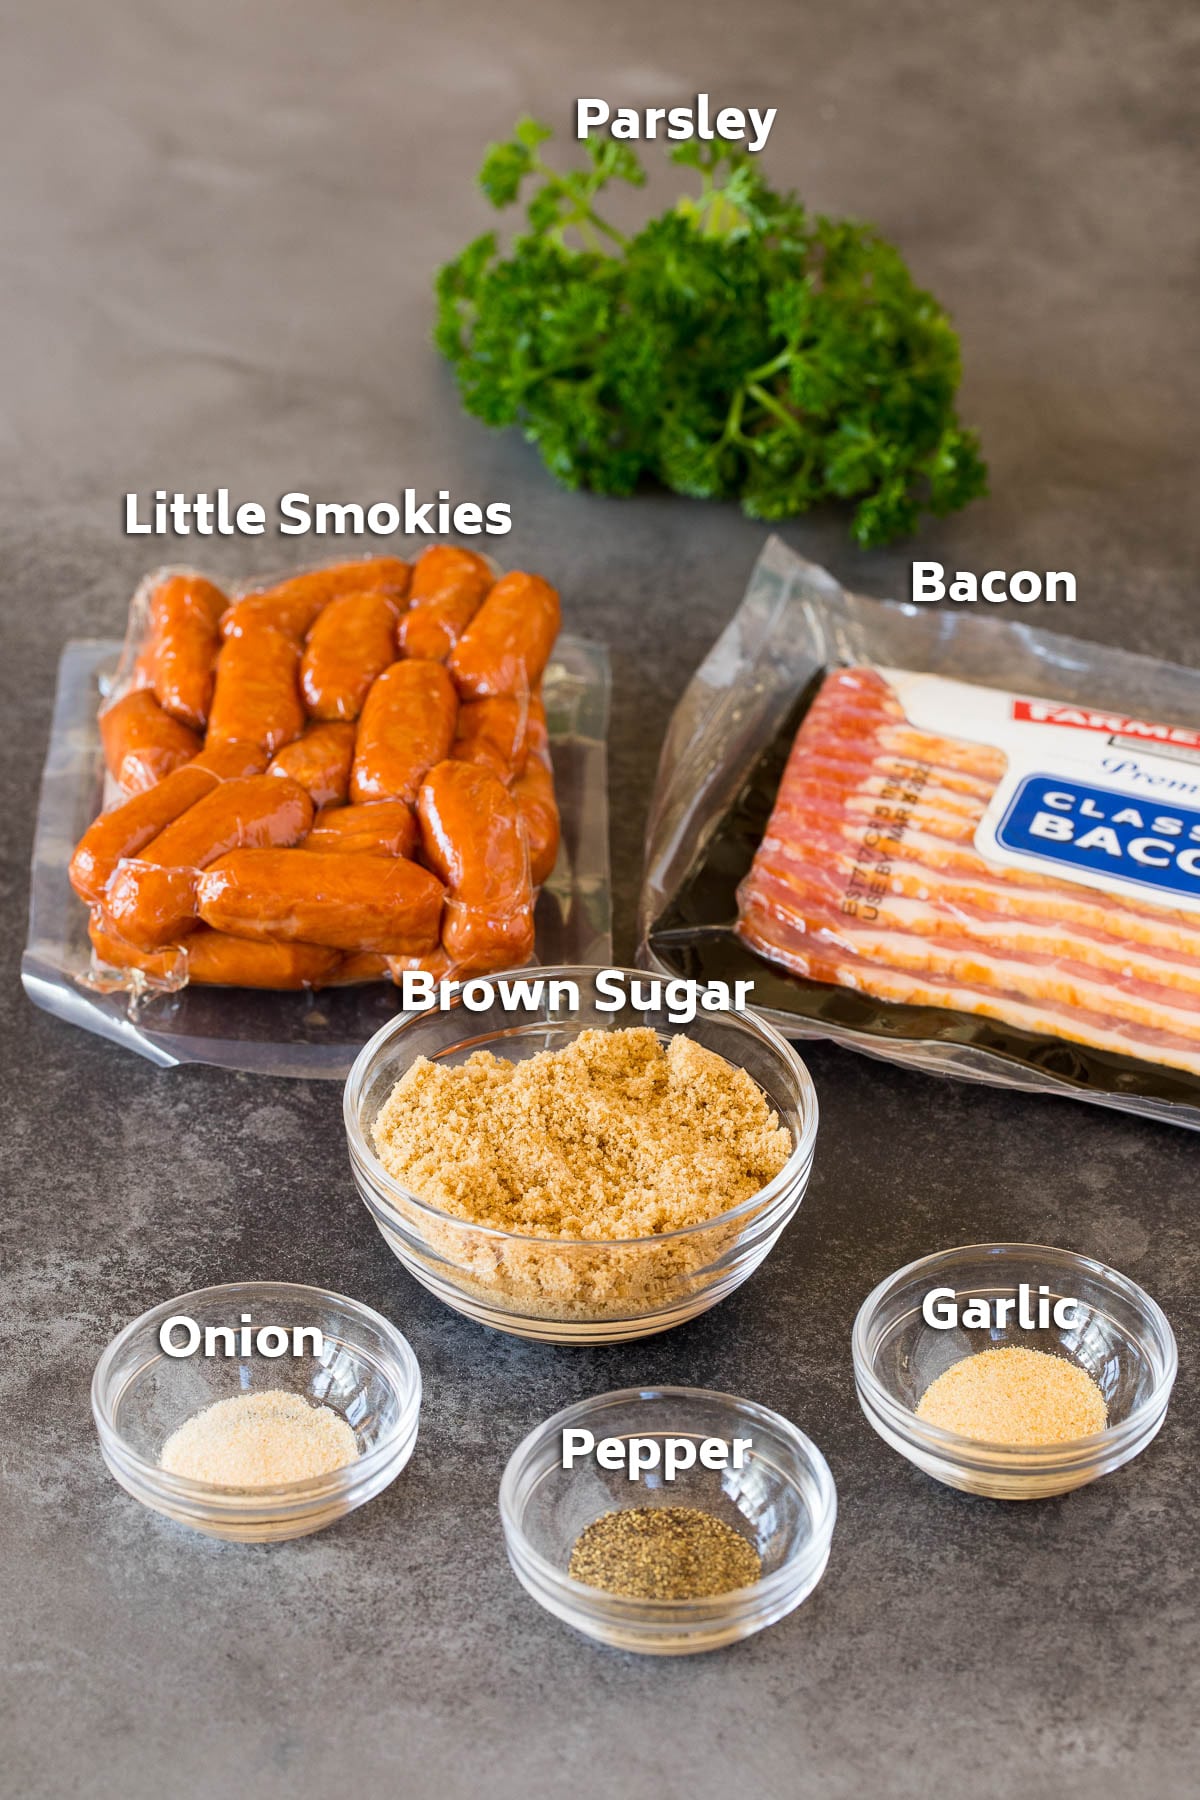 Ingredients including smokies, bacon, brown sugar and spices.